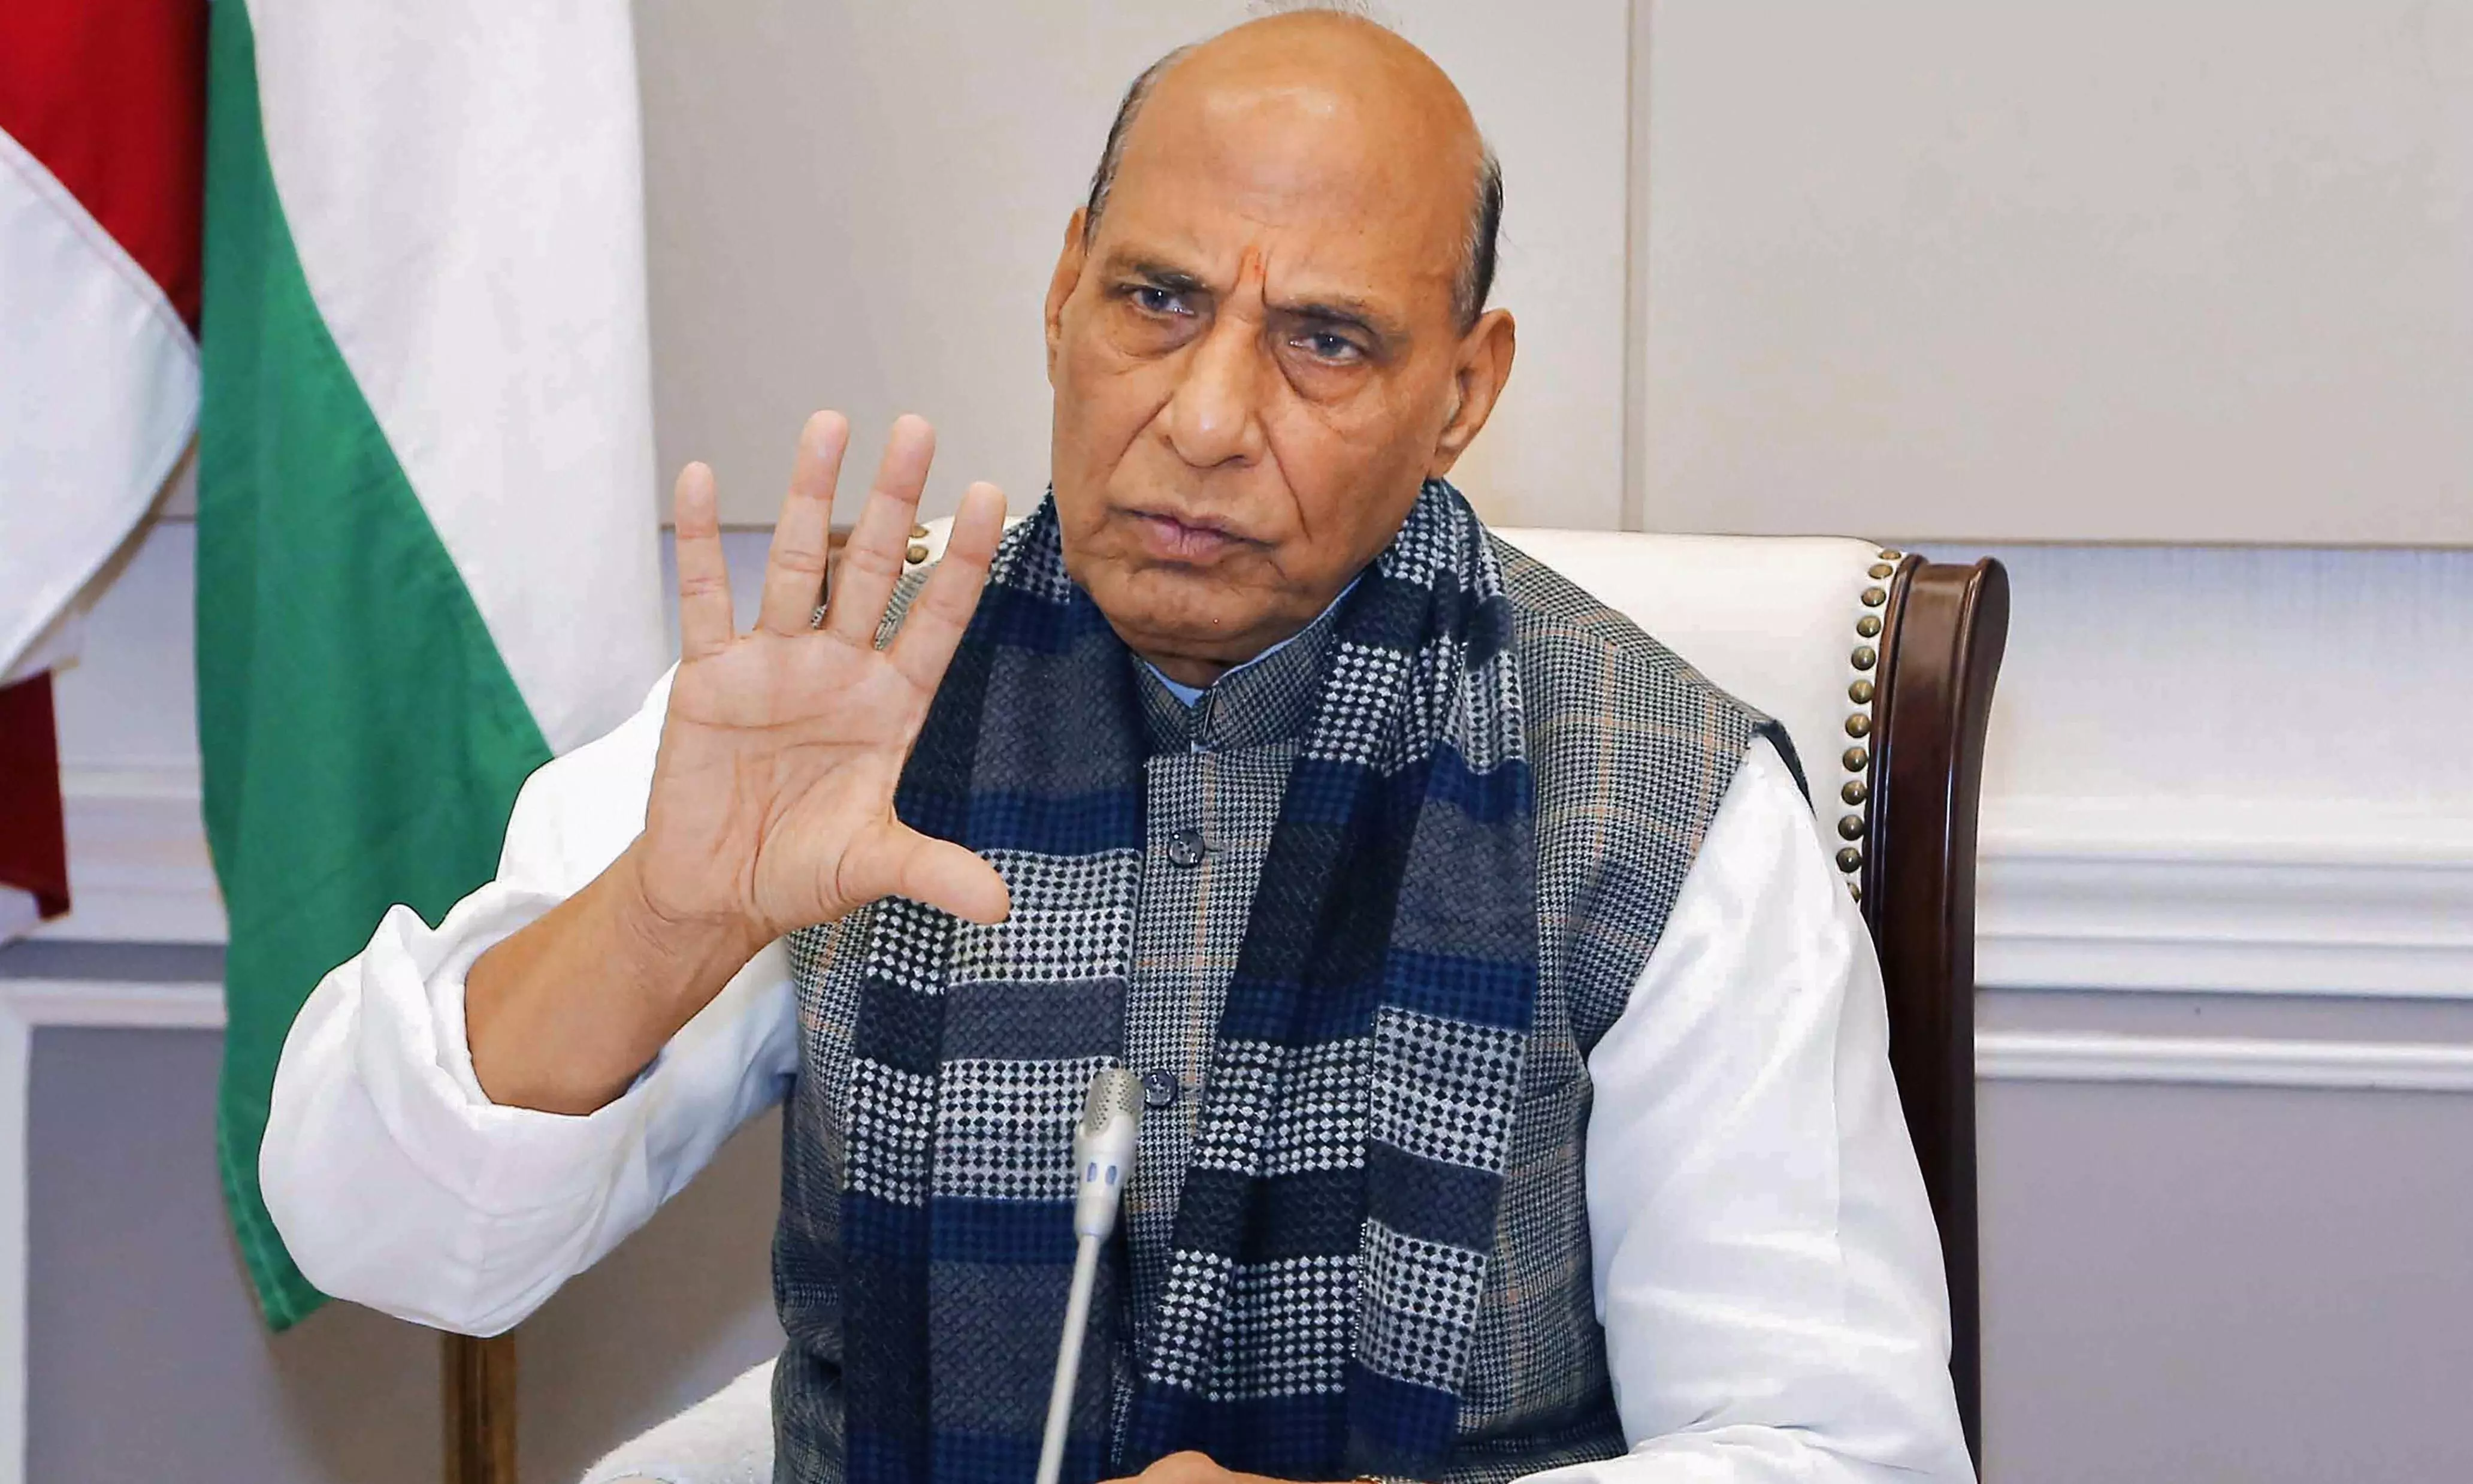 India will be a developed nation by 2047: Rajnath Singh